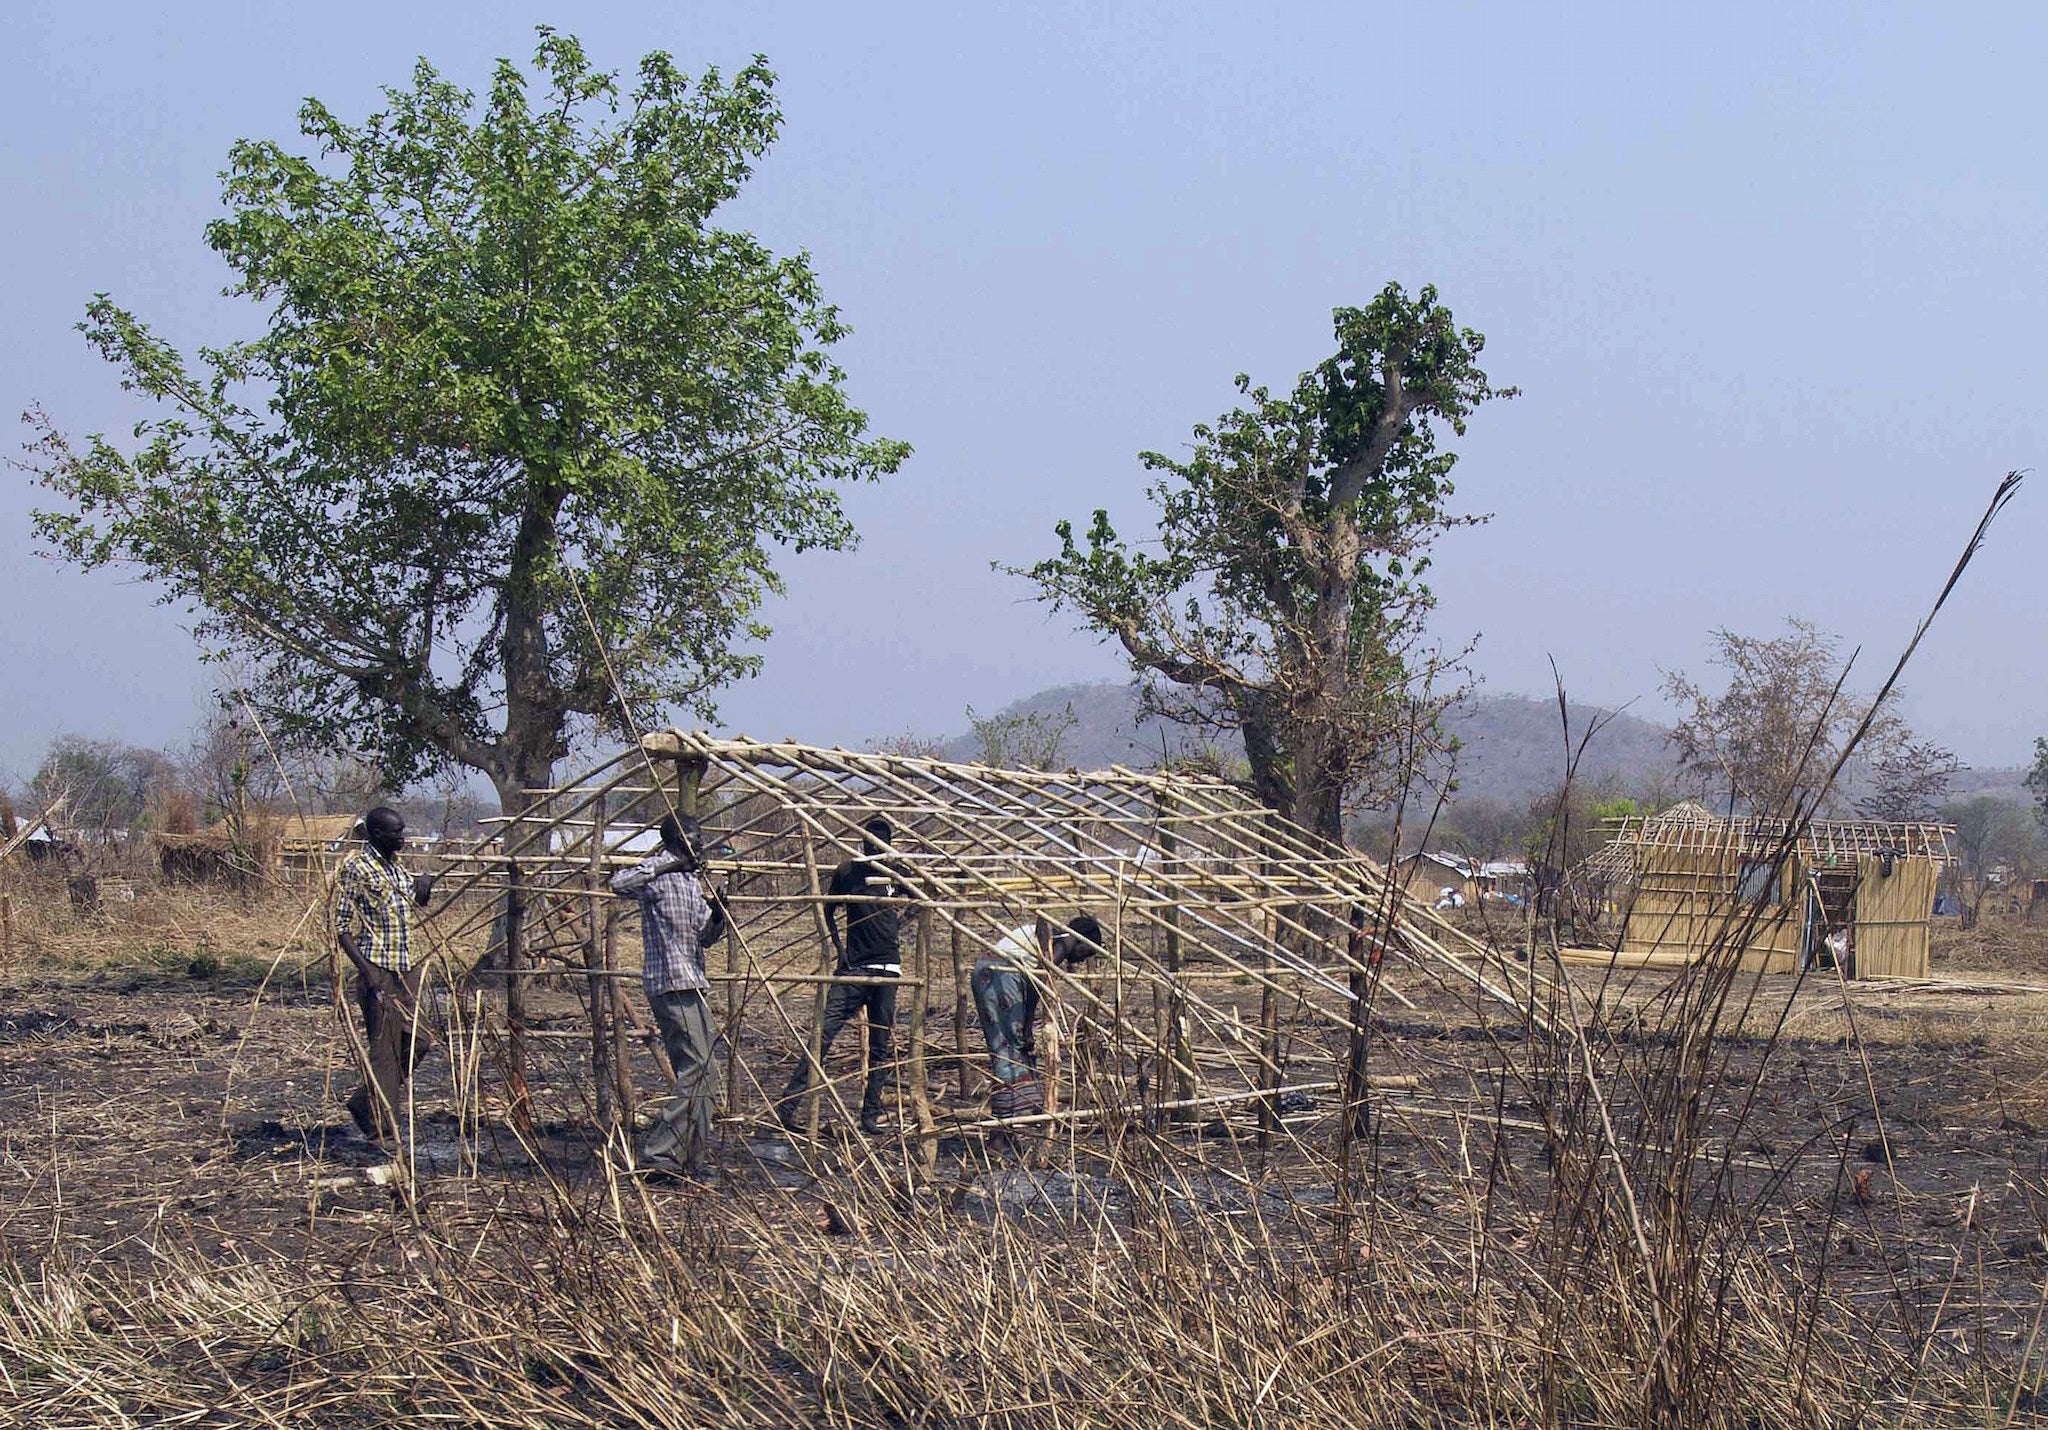 South Sudanese refugees use branches to build a structure at Nyumanzi Resettlement Camp in Adjumani, northern Uganda